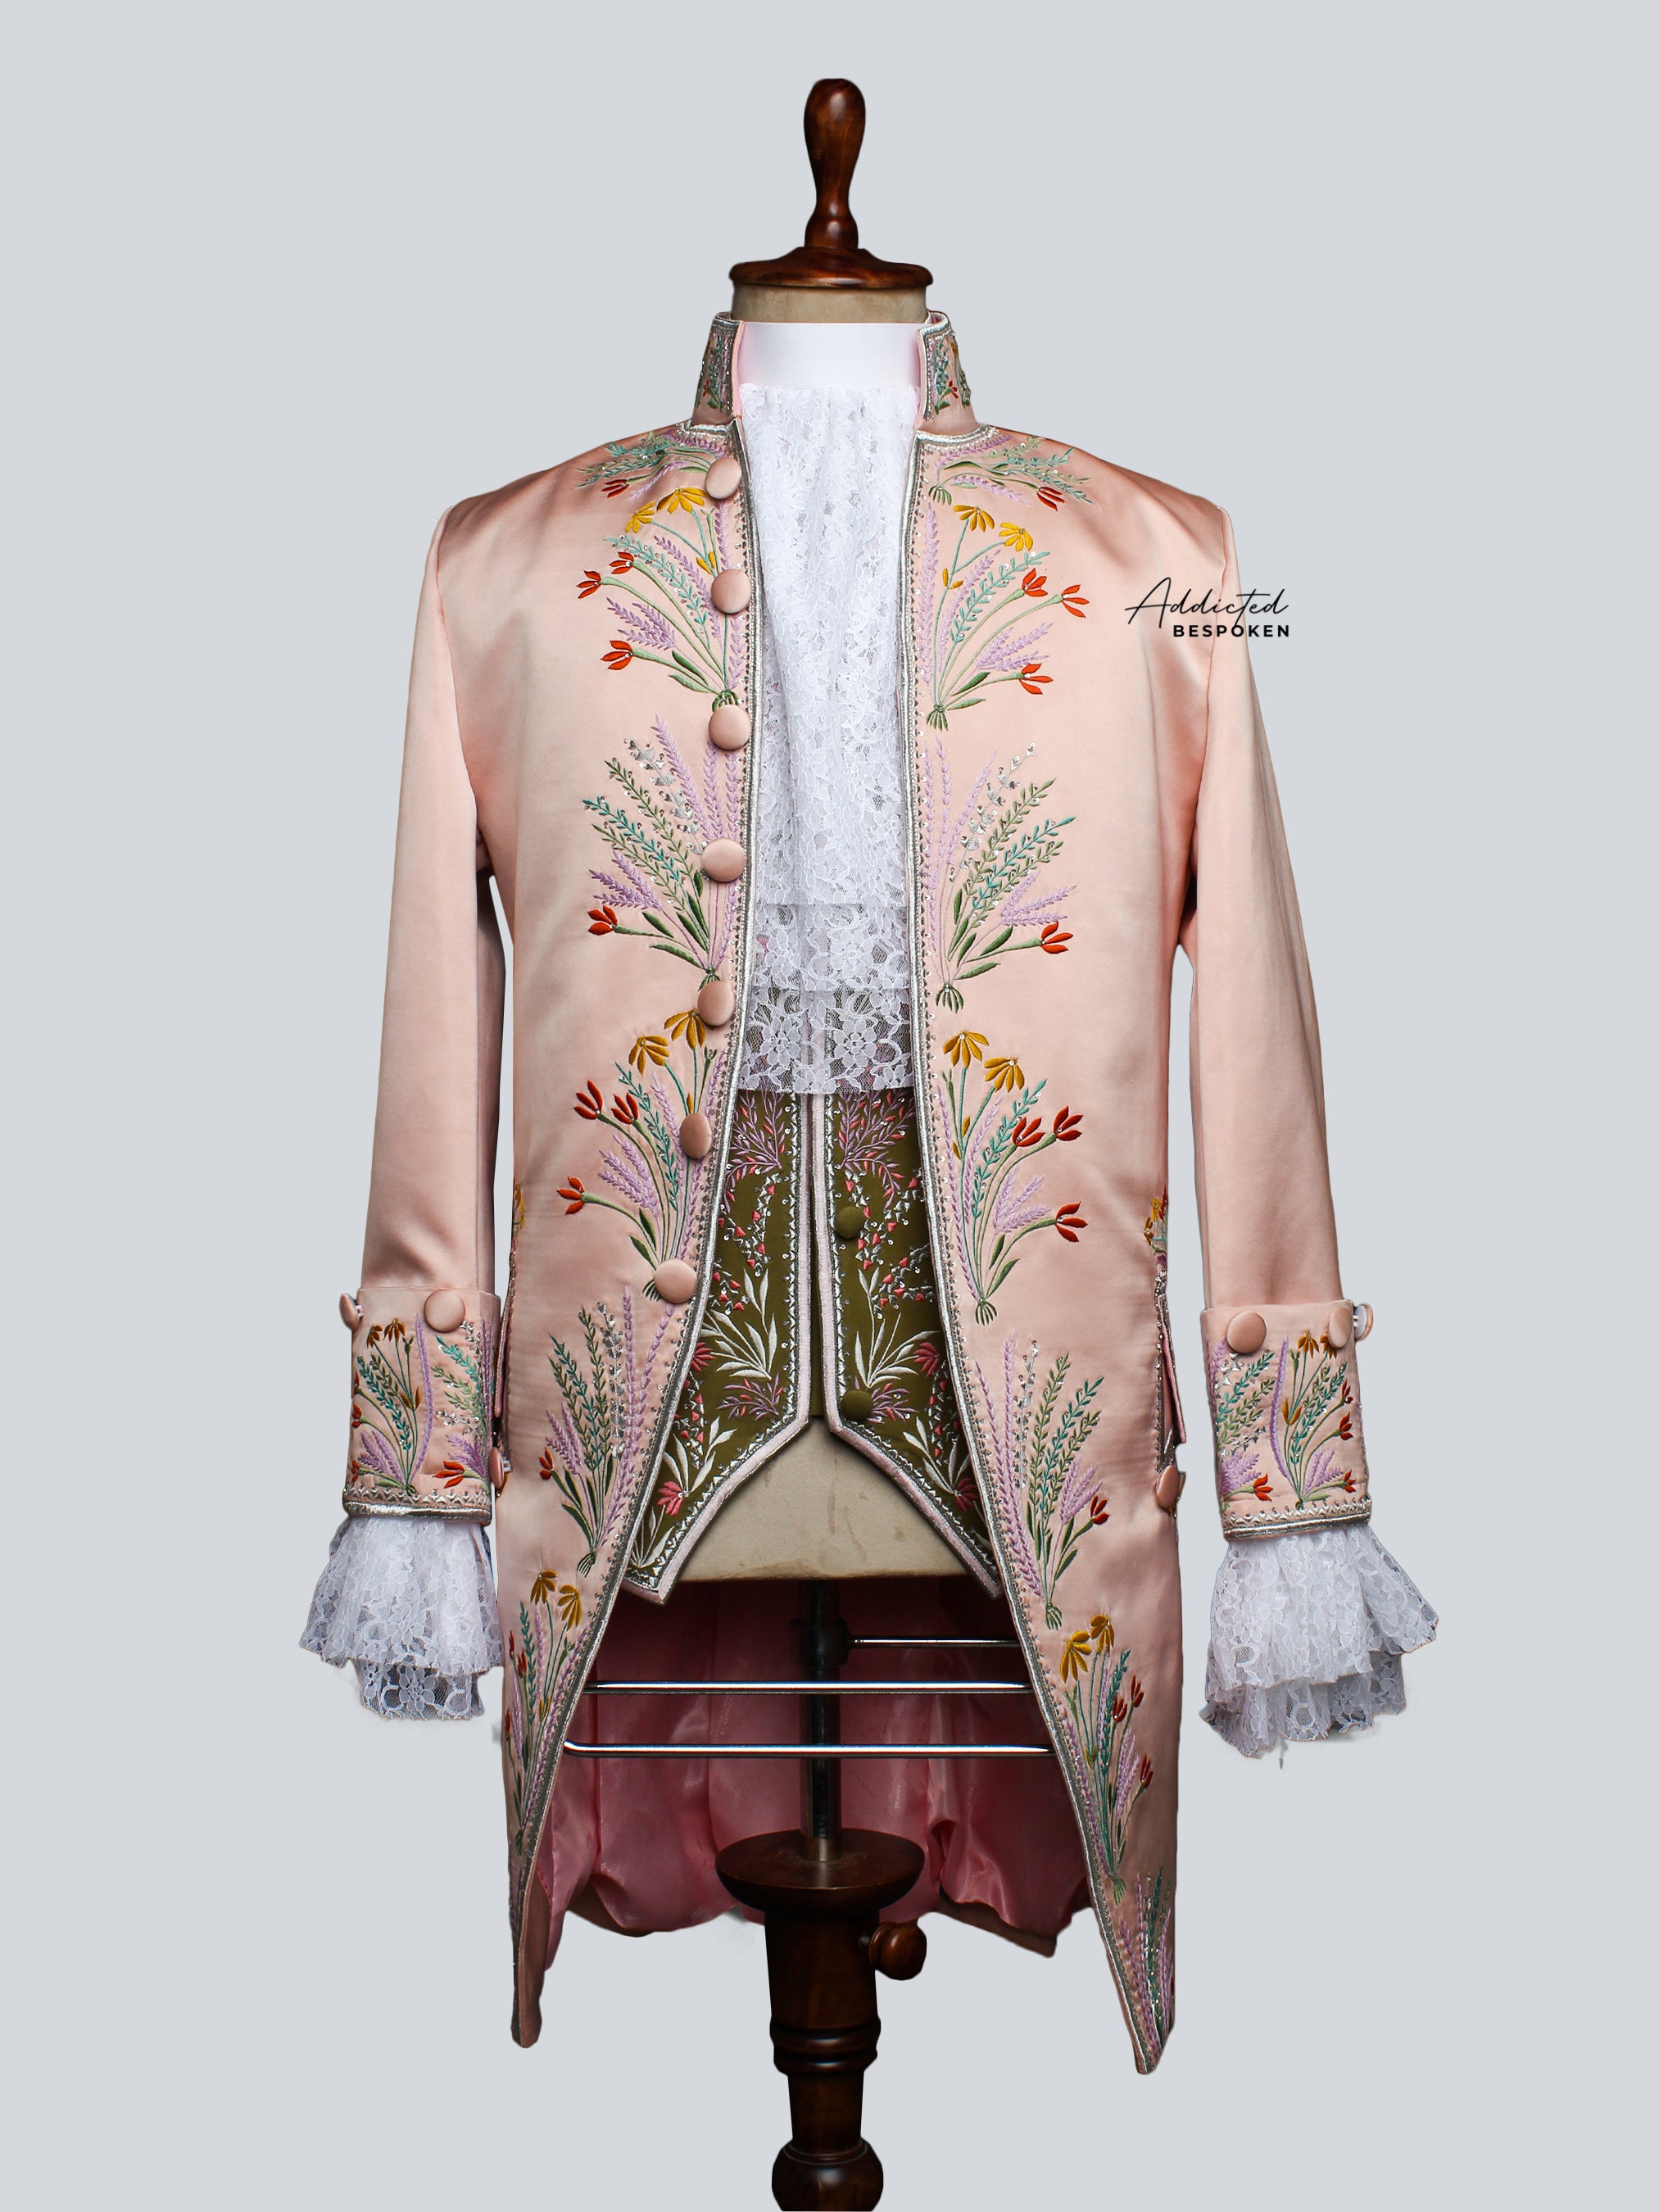 The Pink floral Rococo Suit